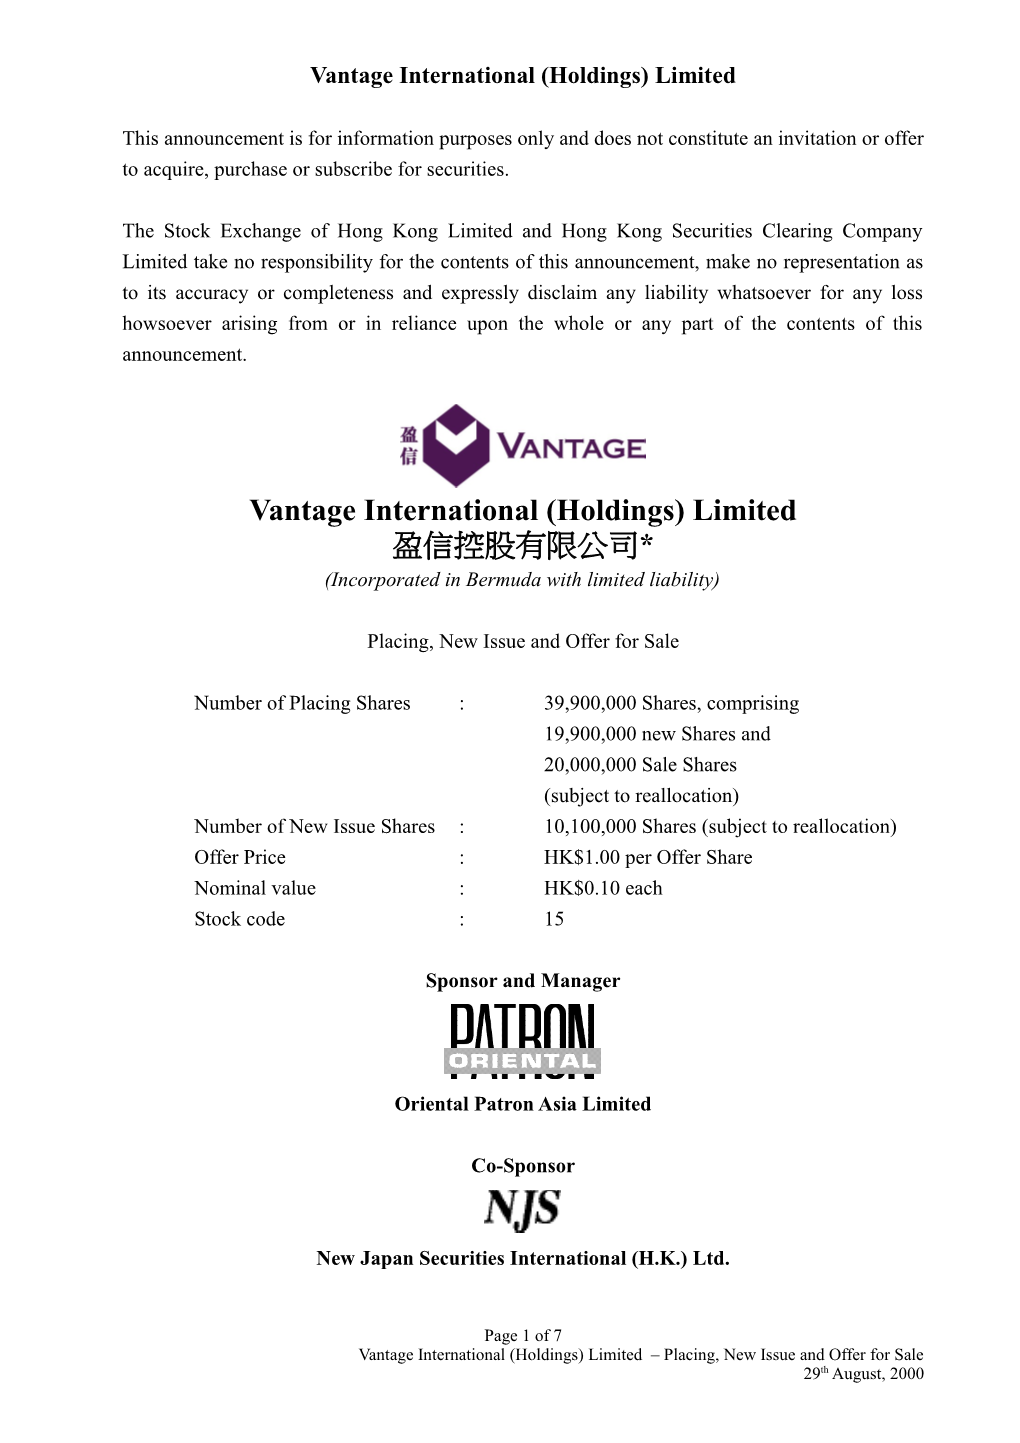 VANTAGE INTERNATIONAL (HOLDINGS) LIMITED 0015 - Announcement